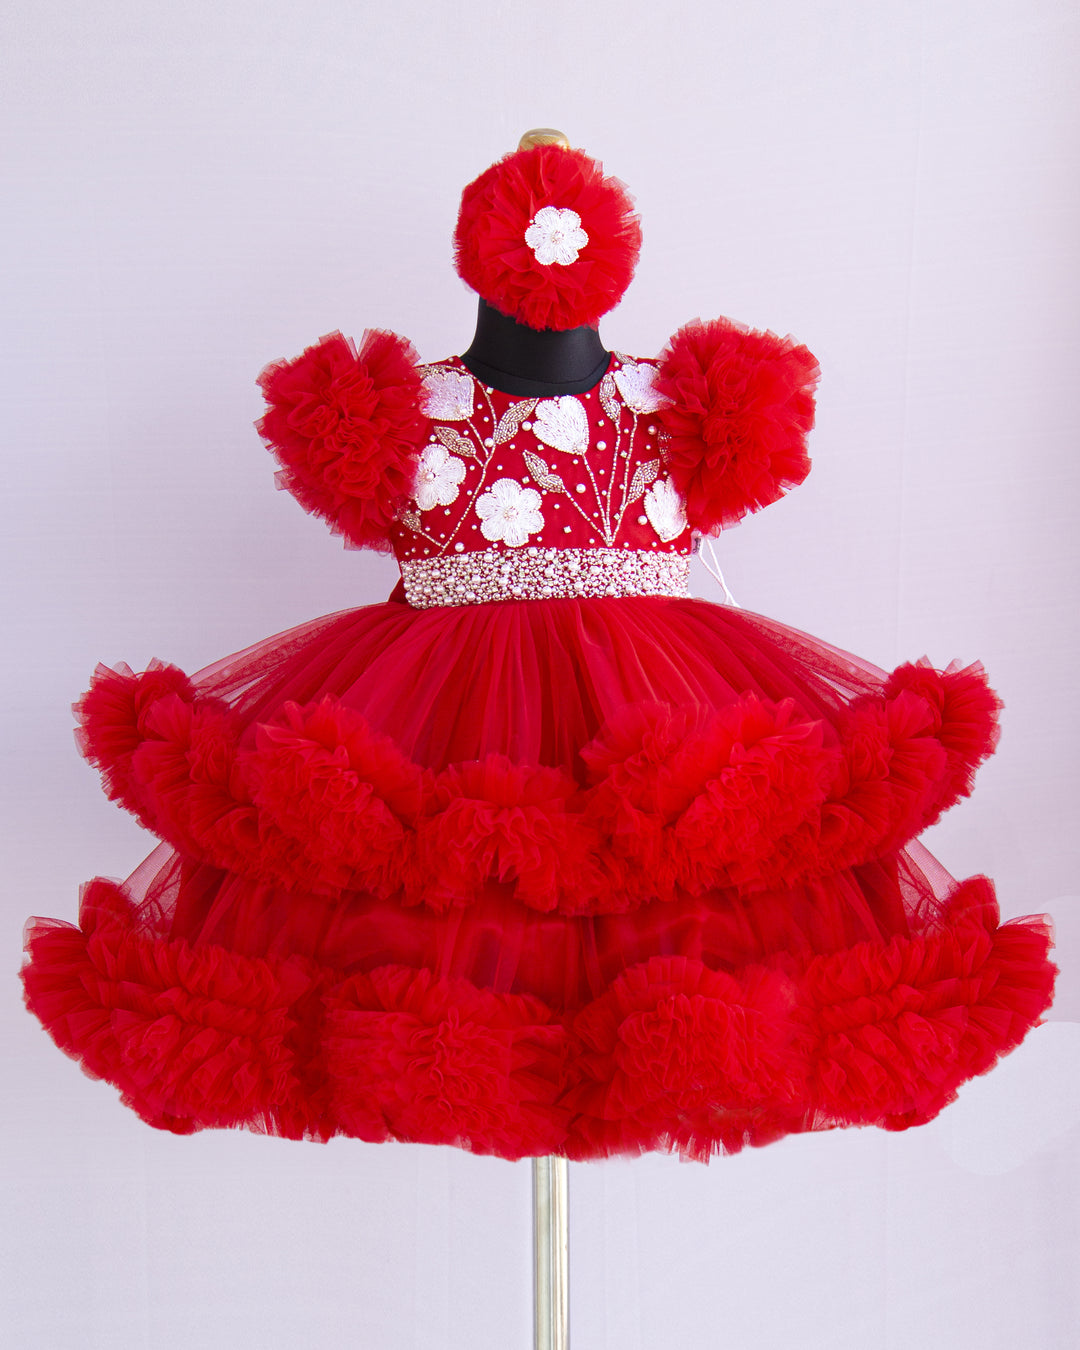 Red Shade Handwork Heavy Ruffles Baby-Girls Partywear Frock
Material: Red shade handwork baby-girls step frock is made with soft mono nylon net fabric. Yoke part is designed with white flower and beads handwork. White pearls